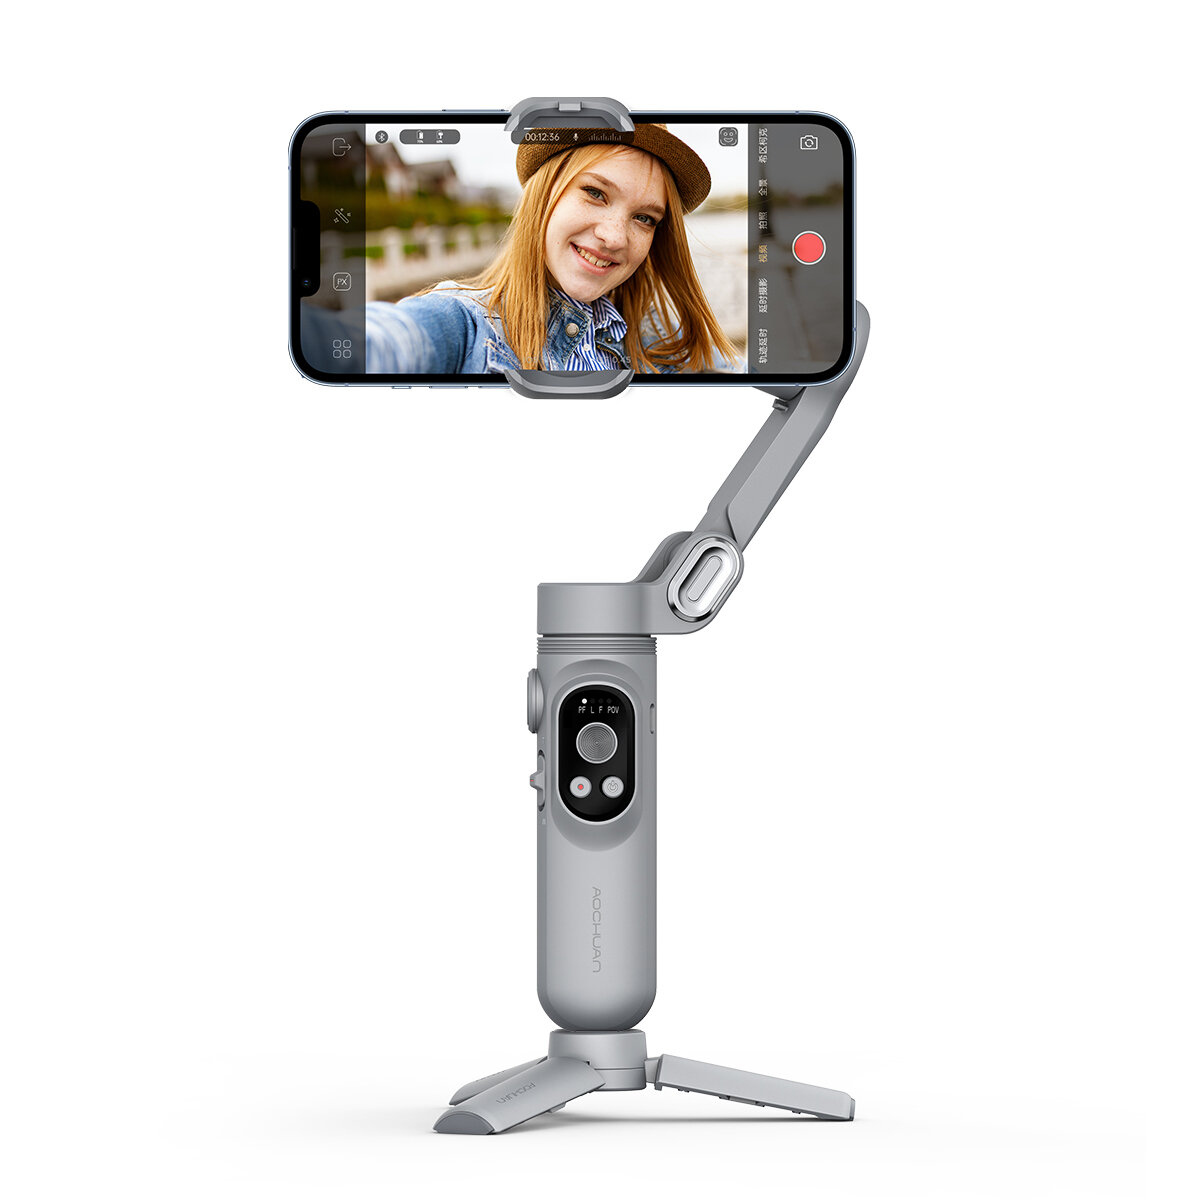 

Aochuan Smart X 3-axis Foldable Handheld Gimbal Stabilizer with Fill Light for Smart Phone Action Camera Vlog Video Phot